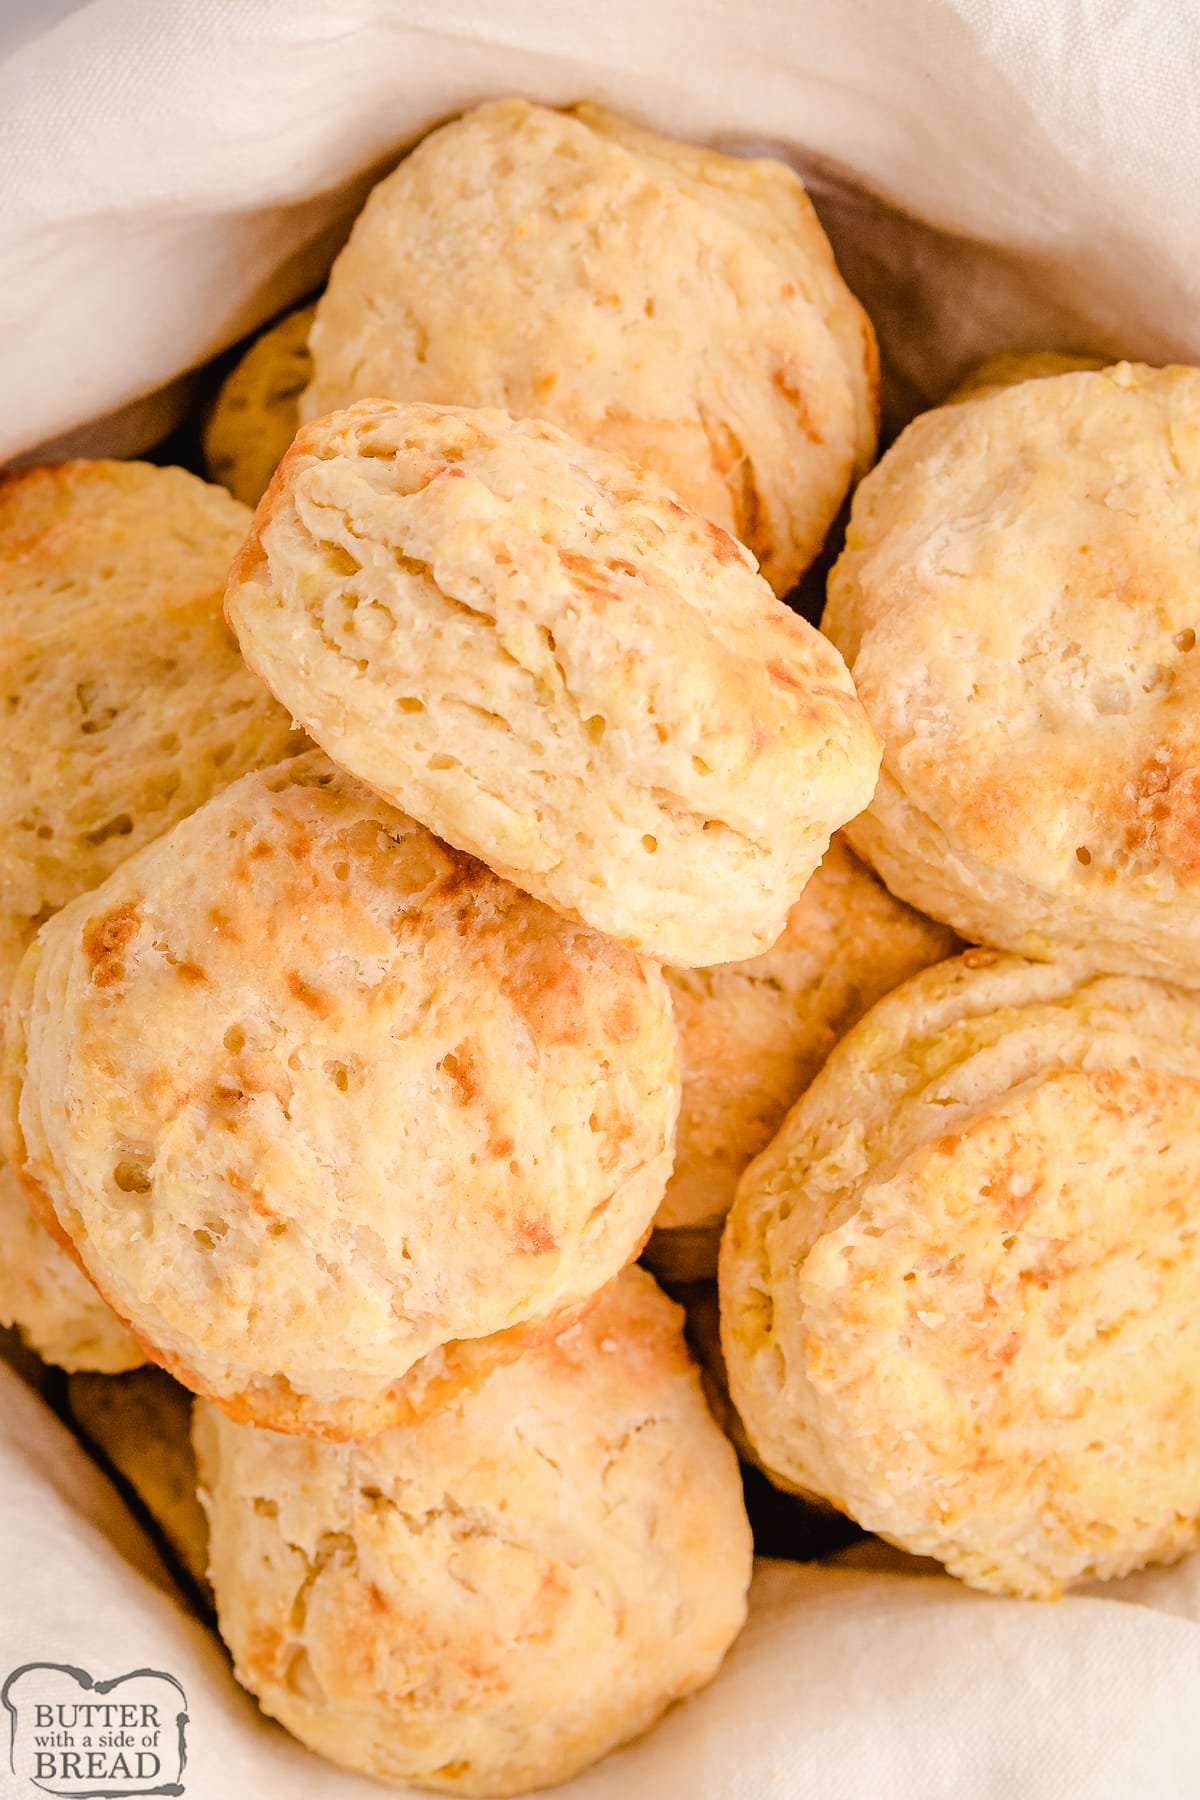 homemade buttery biscuits in a basket